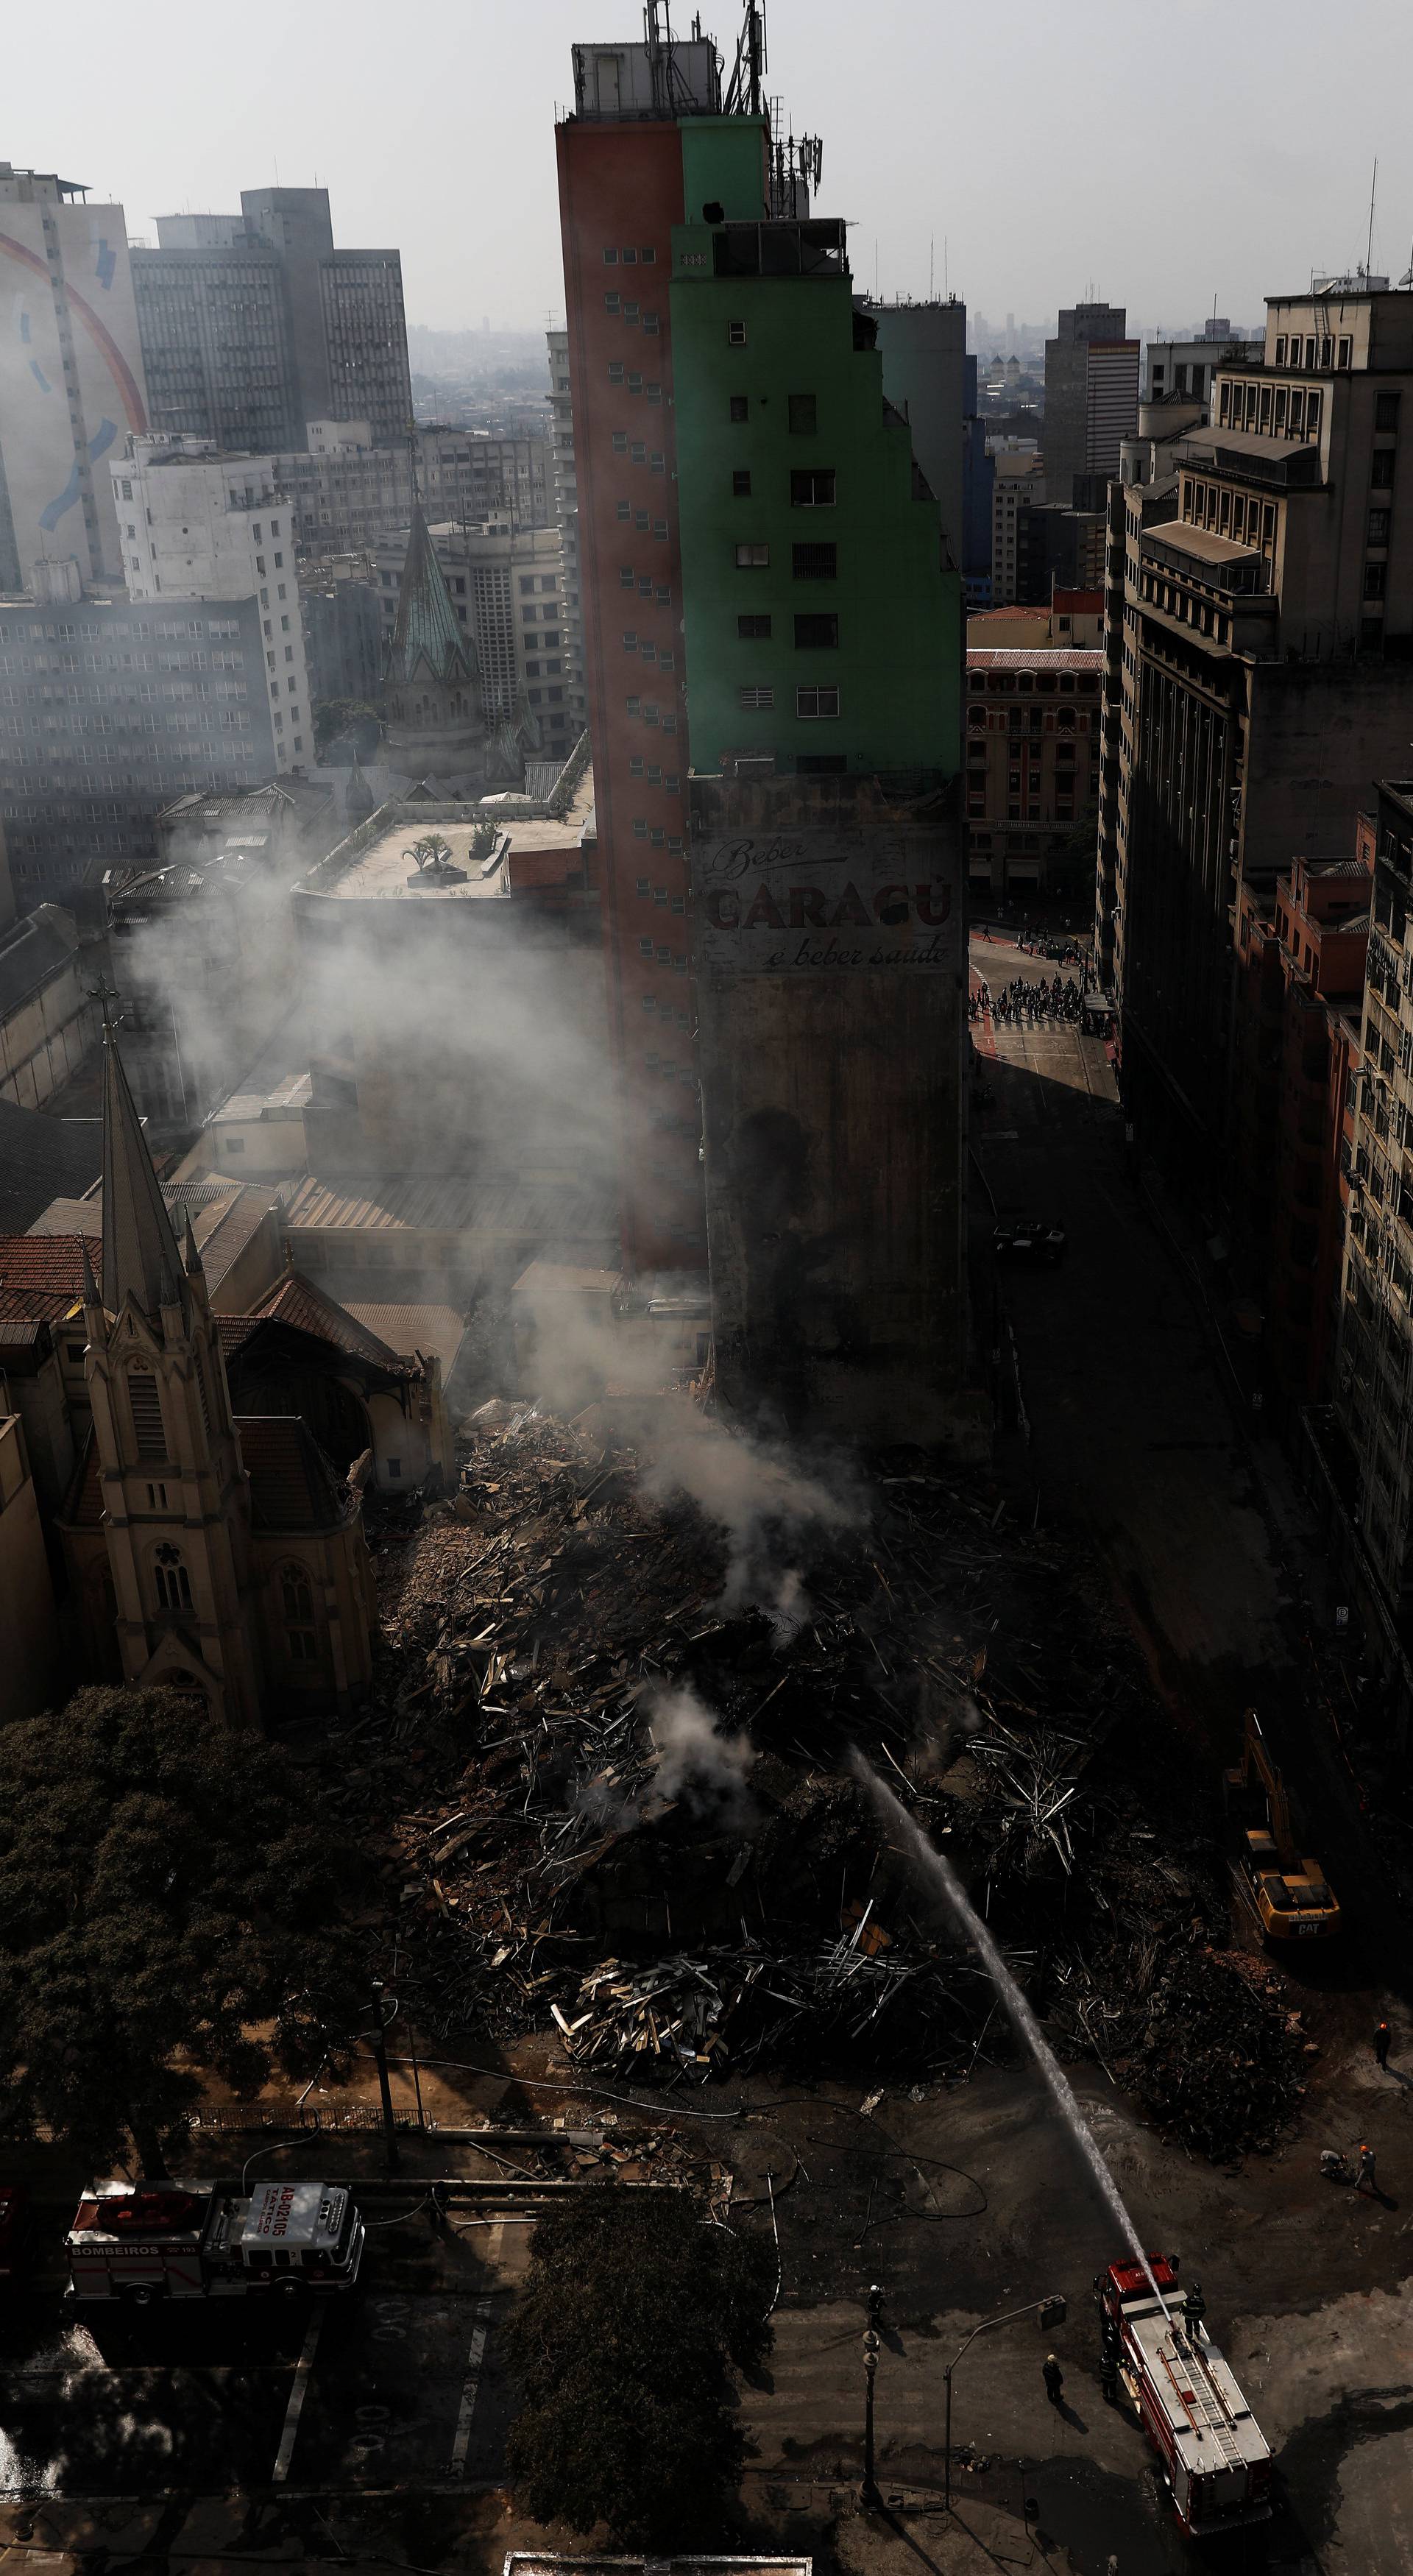 Firefighters try to extinguish the fire of a building that caught fire and collapsed in the center of Sao Paulo